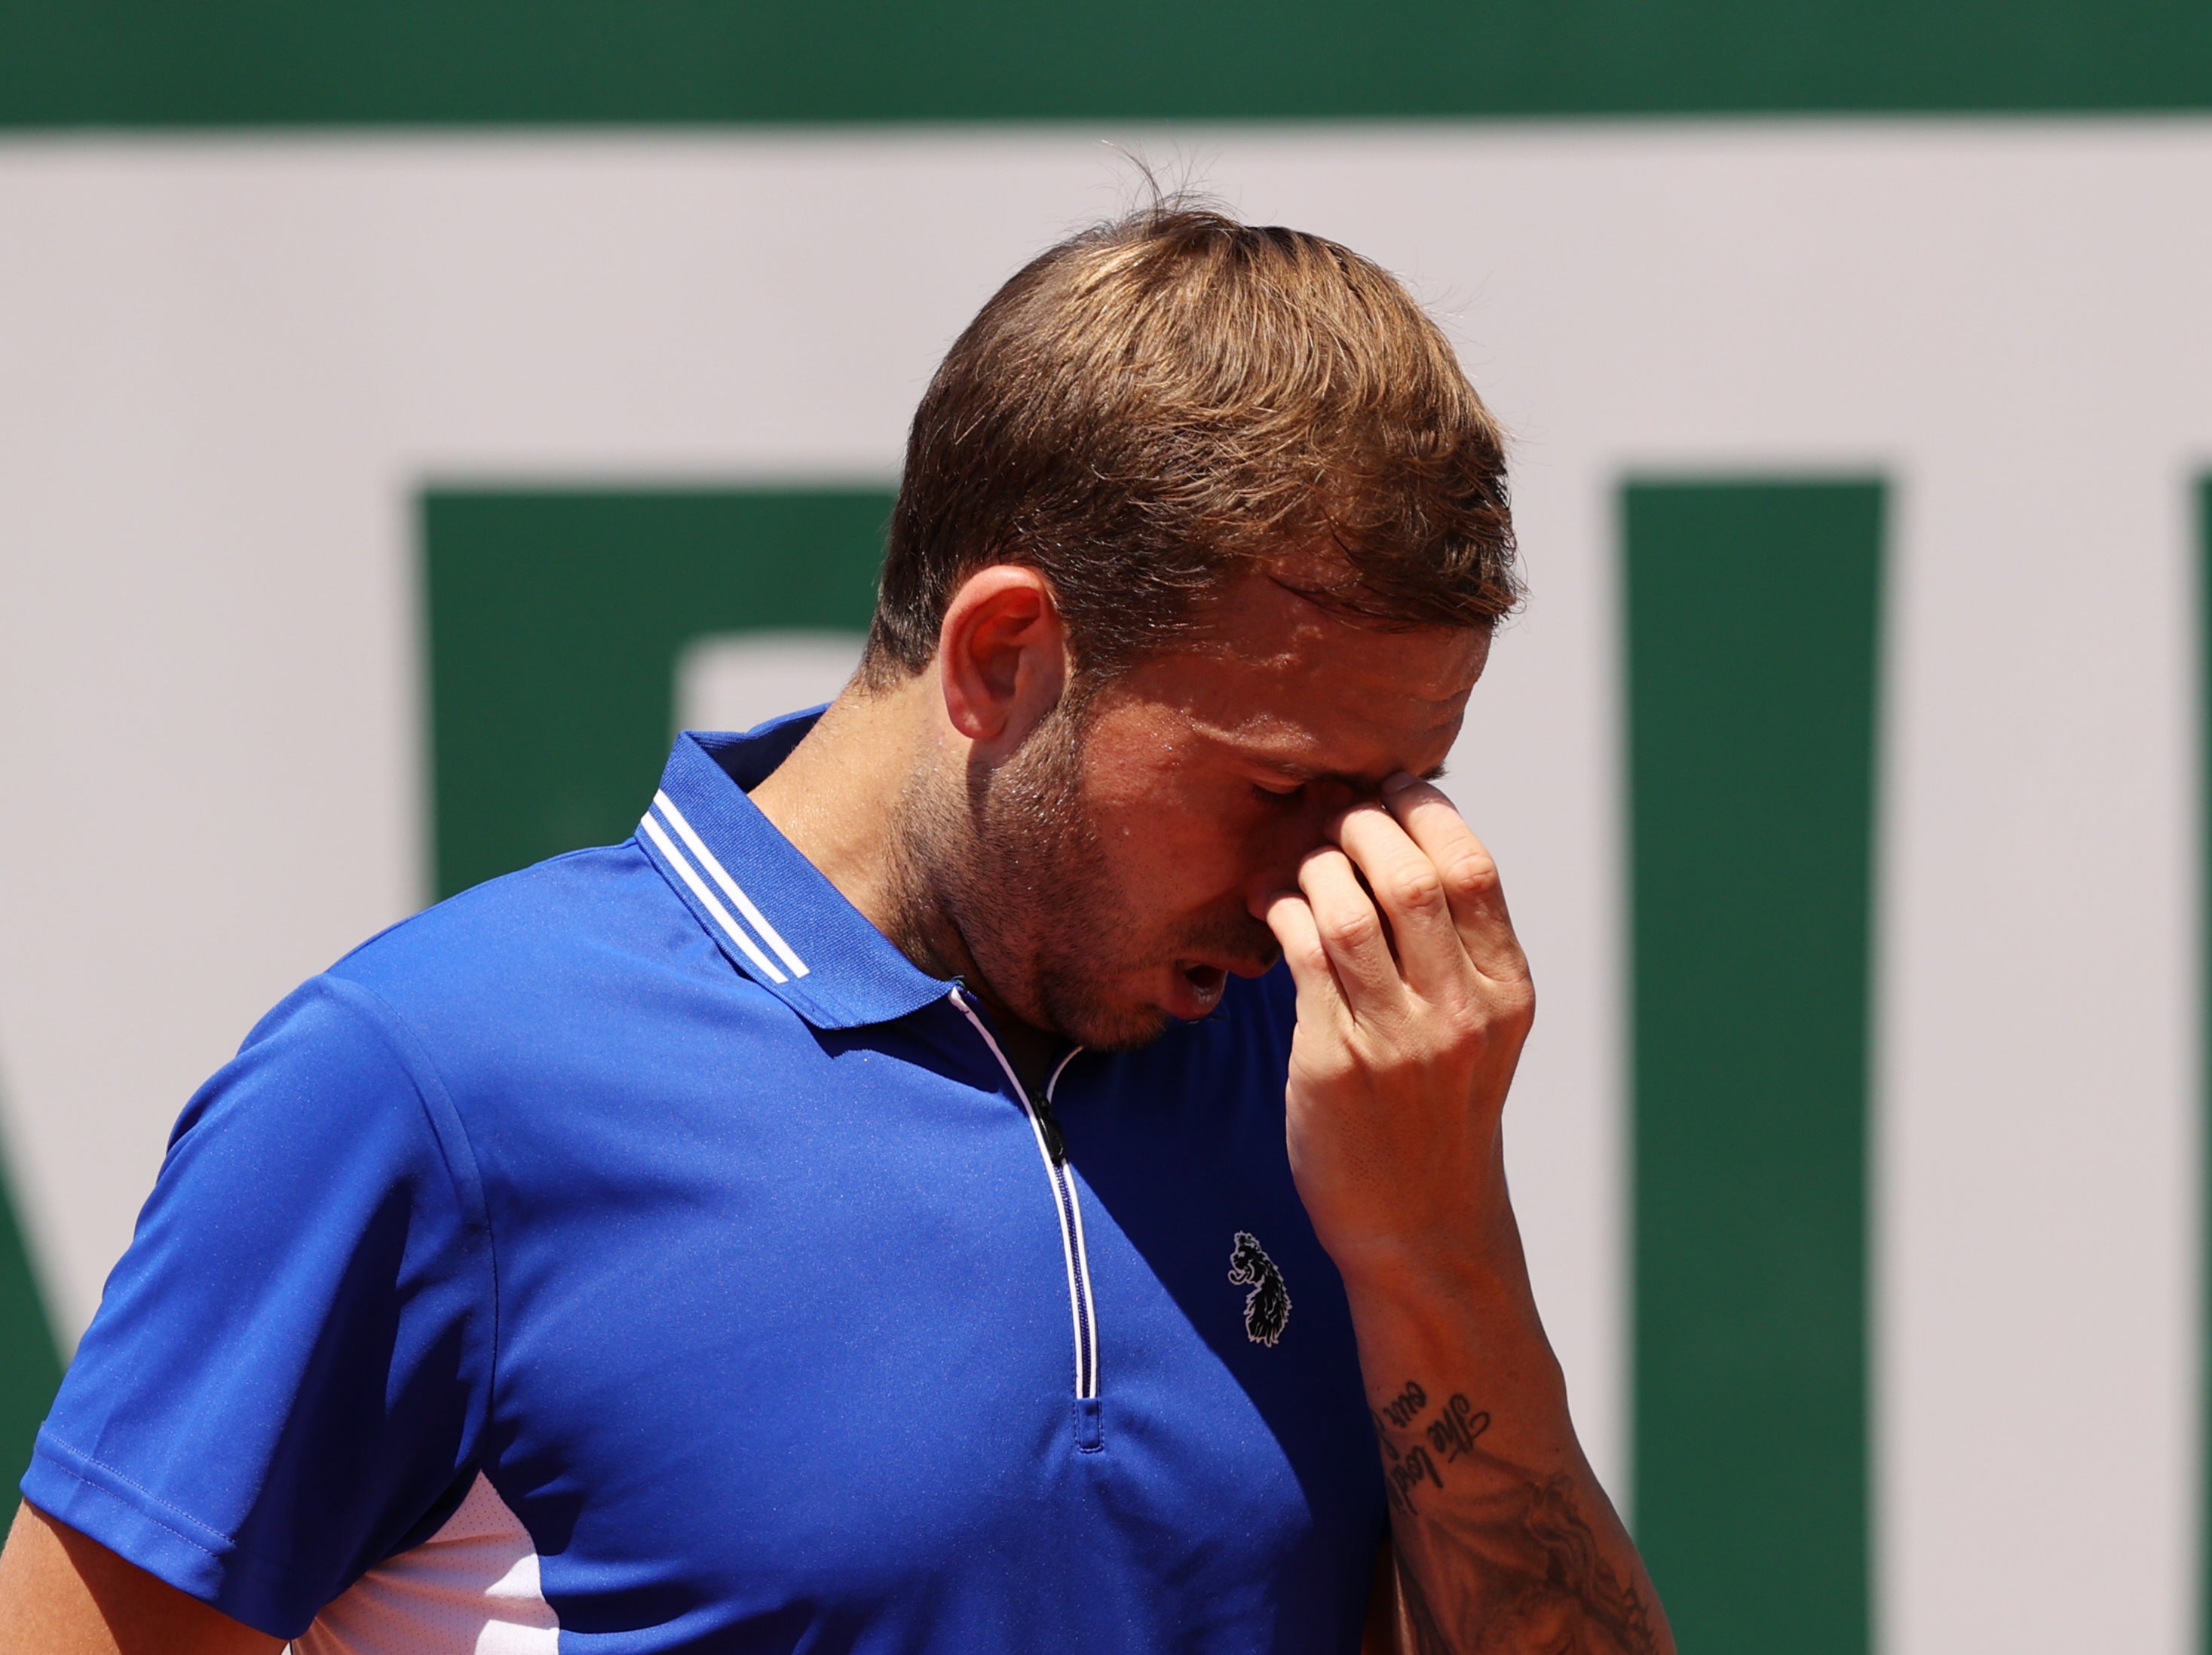 Dan Evans reacts to his loss against 21-year-old Miomir Kecmanovic